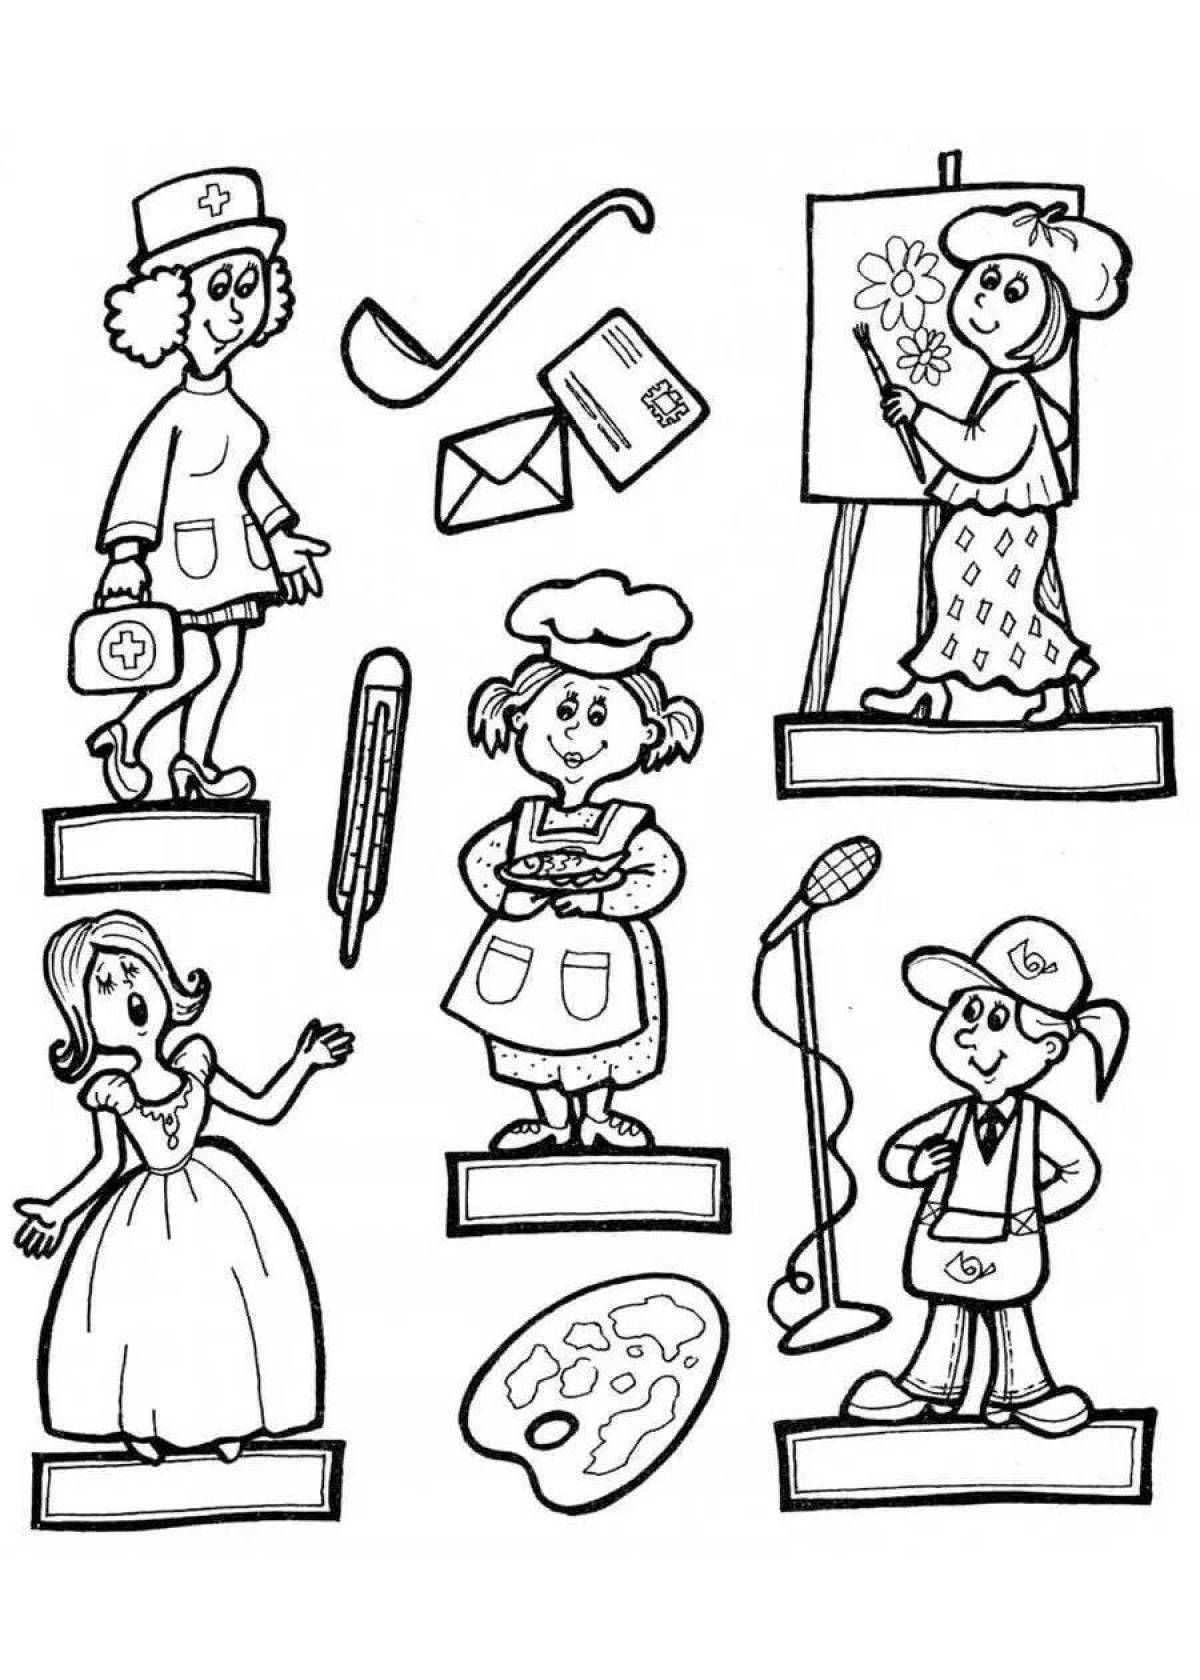 Colorful elementary school occupation coloring page